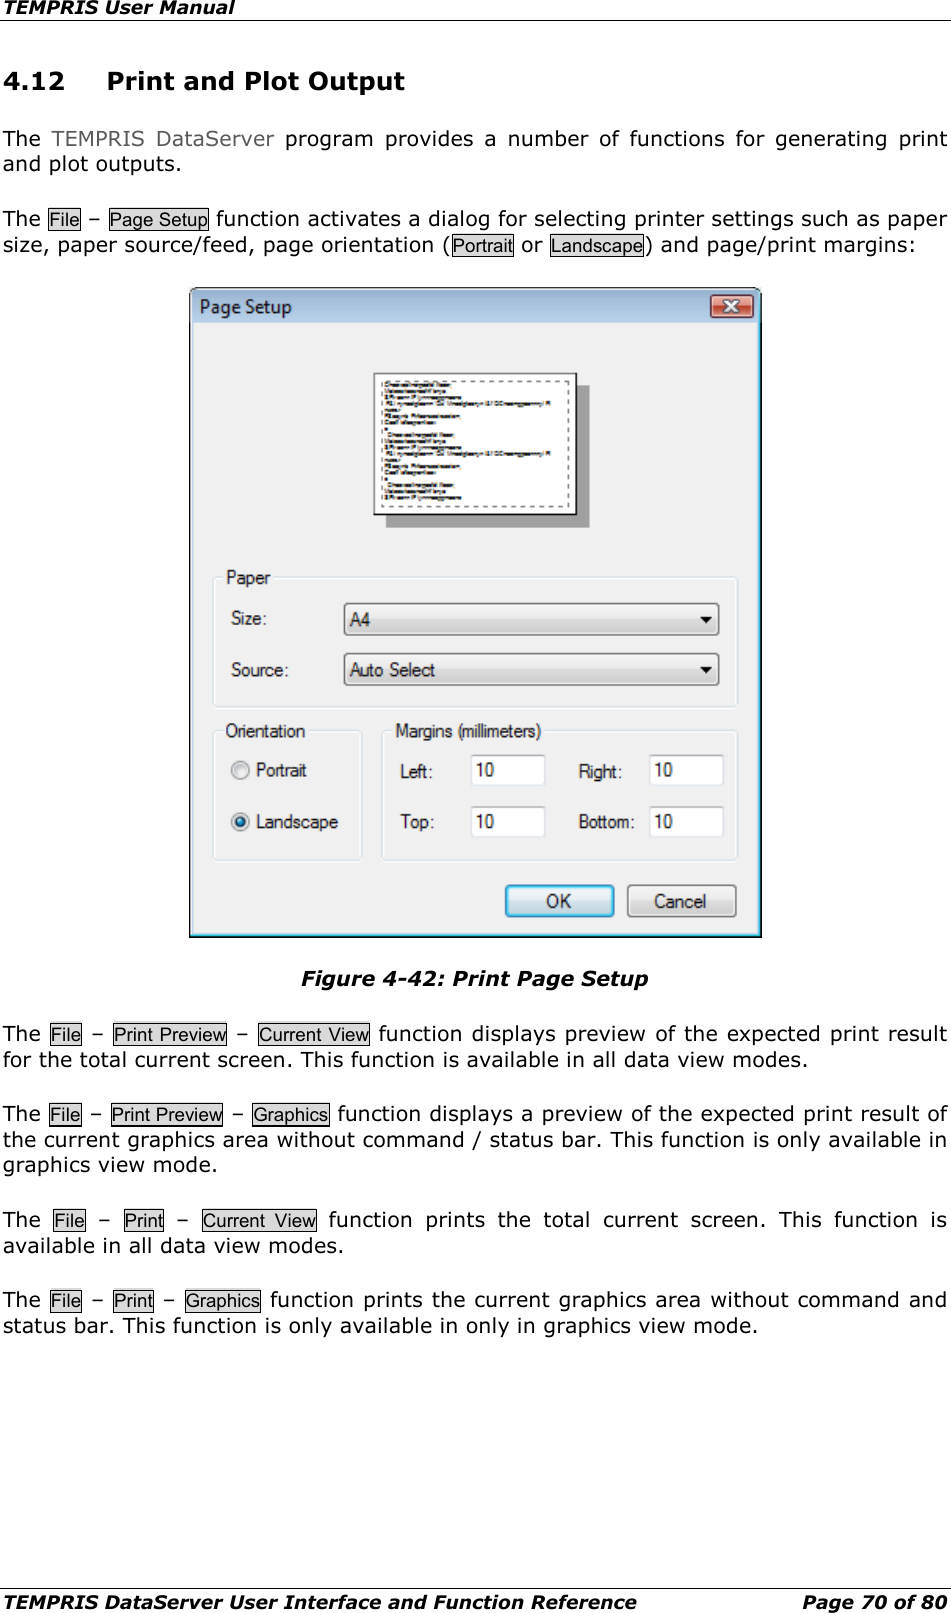 TEMPRIS User Manual TEMPRIS DataServer User Interface and Function Reference Page 70 of 80 4.12 Print and Plot Output The  TEMPRIS DataServer program provides a number of functions for generating print and plot outputs. The File – Page Setup function activates a dialog for selecting printer settings such as paper size, paper source/feed, page orientation (Portrait or Landscape) and page/print margins:  Figure 4-42: Print Page Setup The  File – Print Preview – Current View function displays preview of the expected print result for the total current screen. This function is available in all data view modes. The File – Print Preview – Graphics function displays a preview of the expected print result of the current graphics area without command / status bar. This function is only available in graphics view mode. The  File  –  Print  –  Current  View function prints the total current screen. This function is available in all data view modes. The  File – Print – Graphics function prints the current graphics area without command and status bar. This function is only available in only in graphics view mode.     